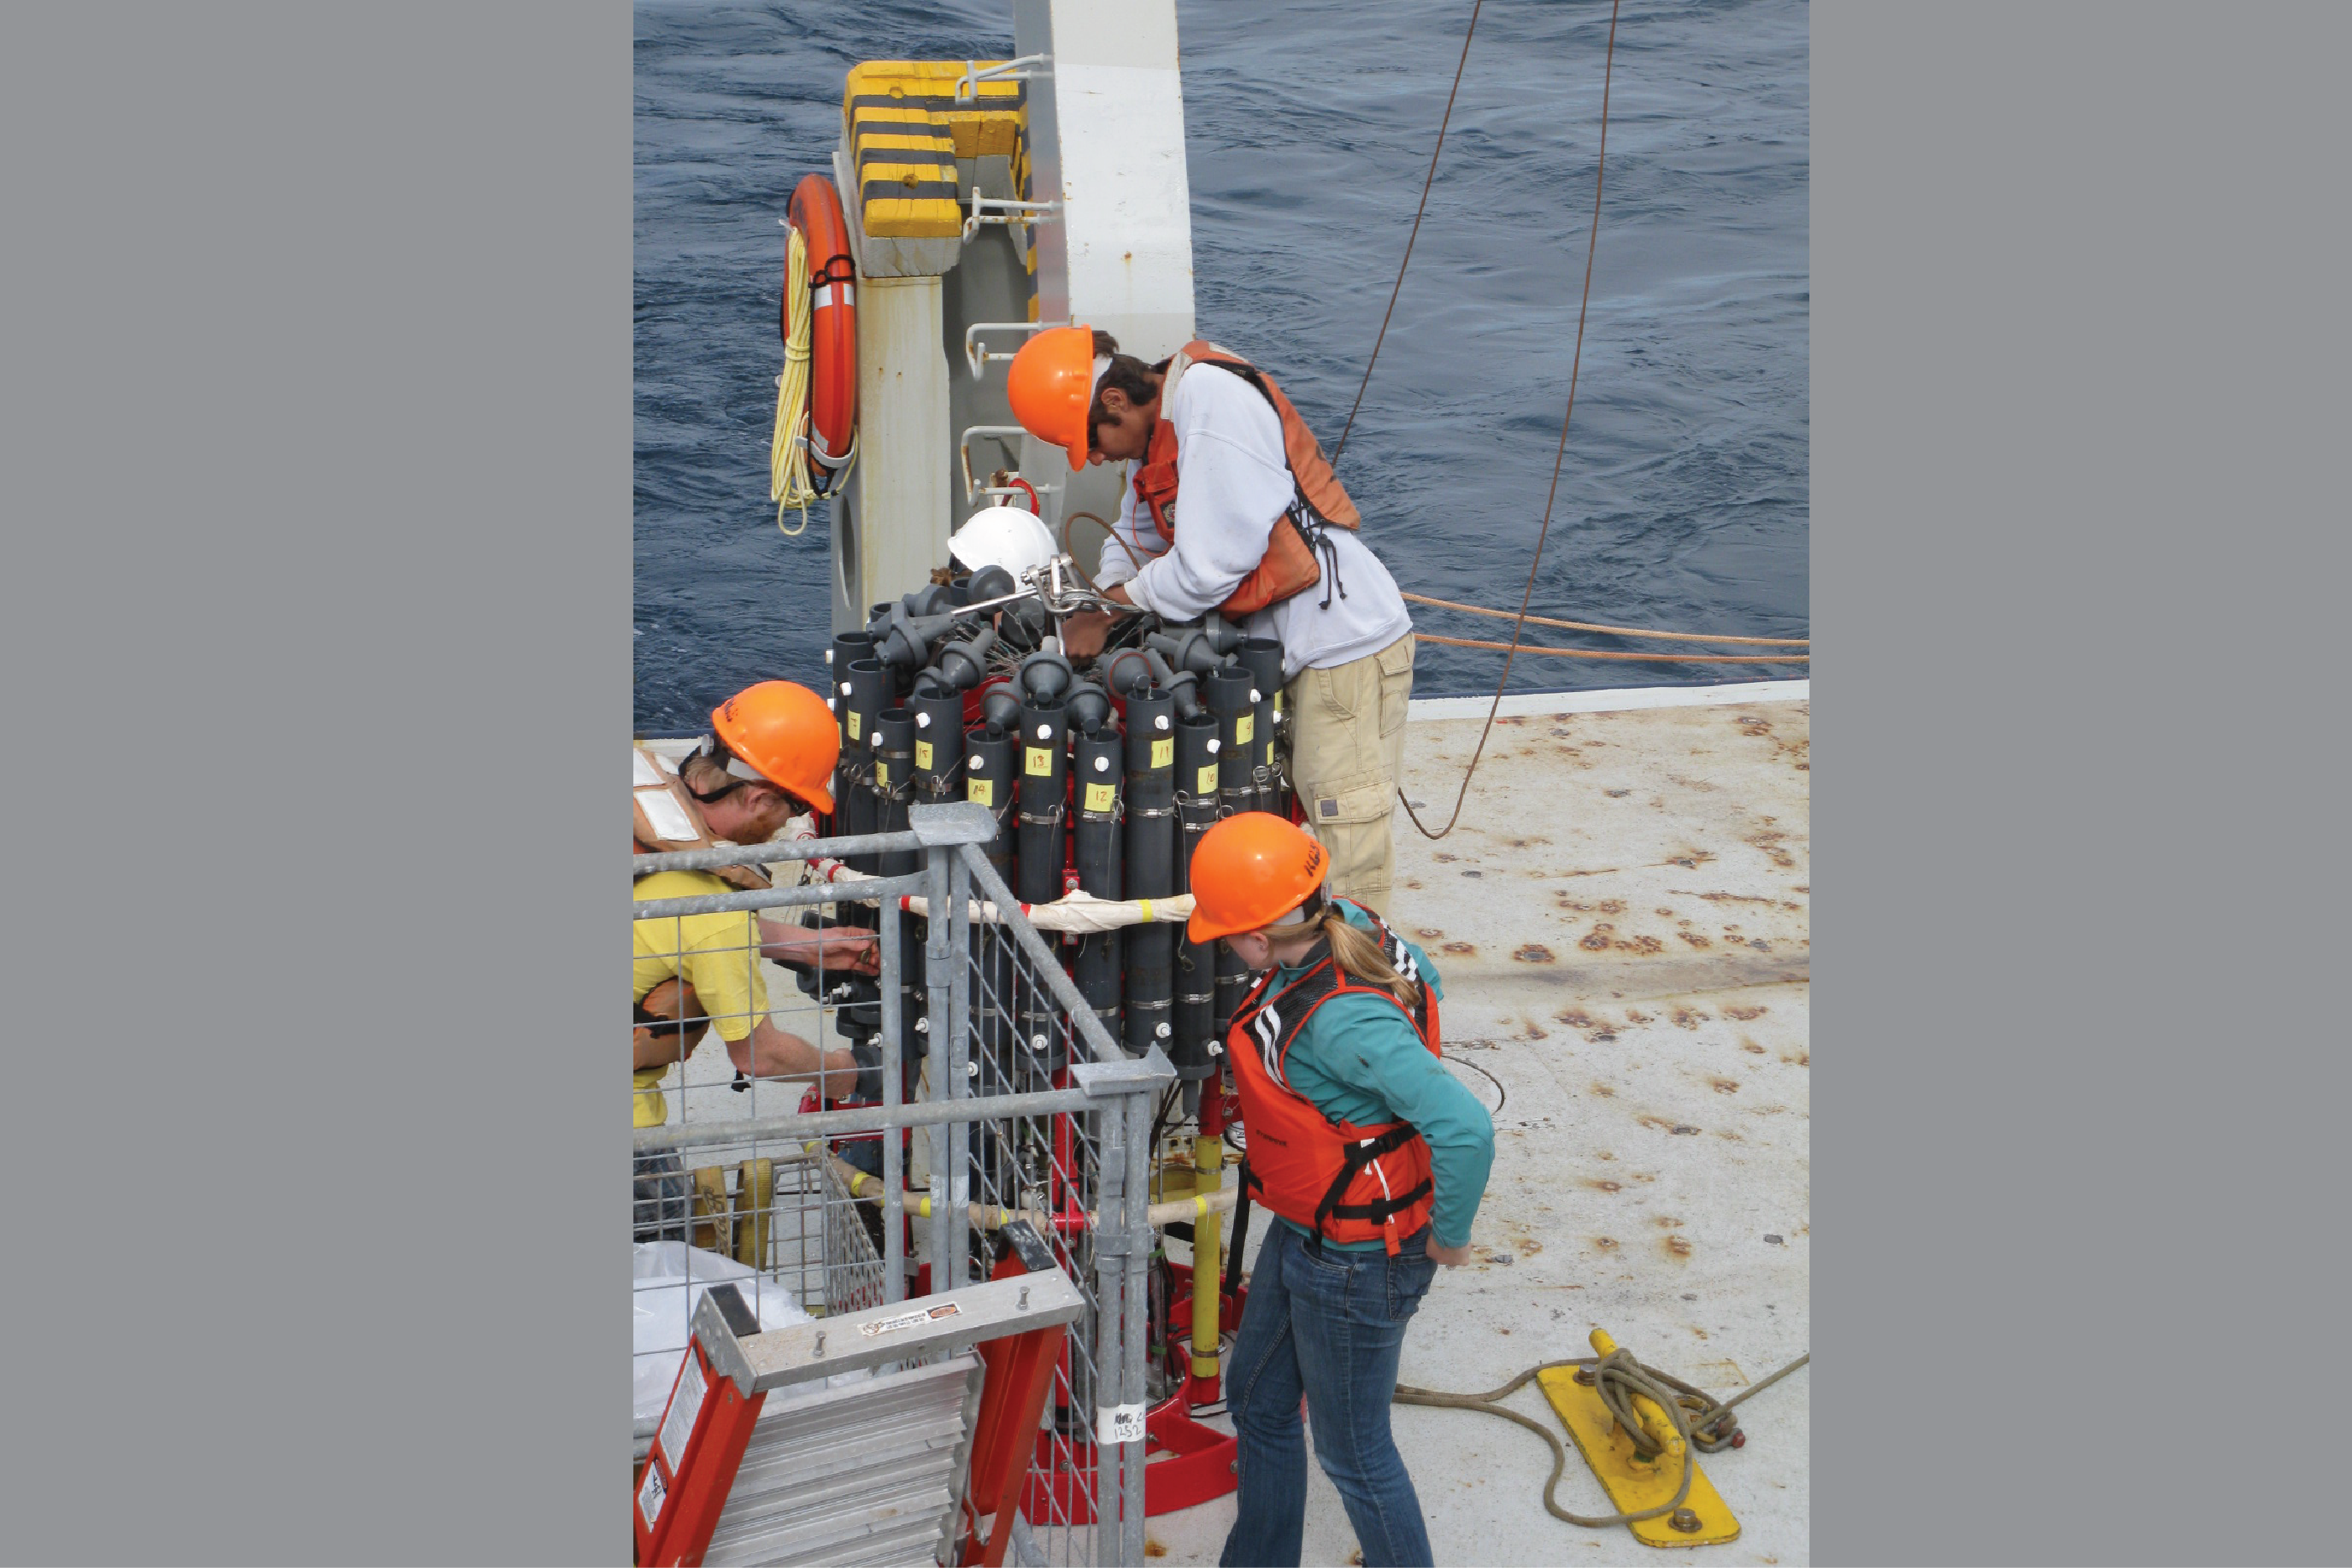 Graduate students prepare the CTD rosette for bottle samples collected near the Del Mar mooring, for calibration and validation of the moored sensors, 2011